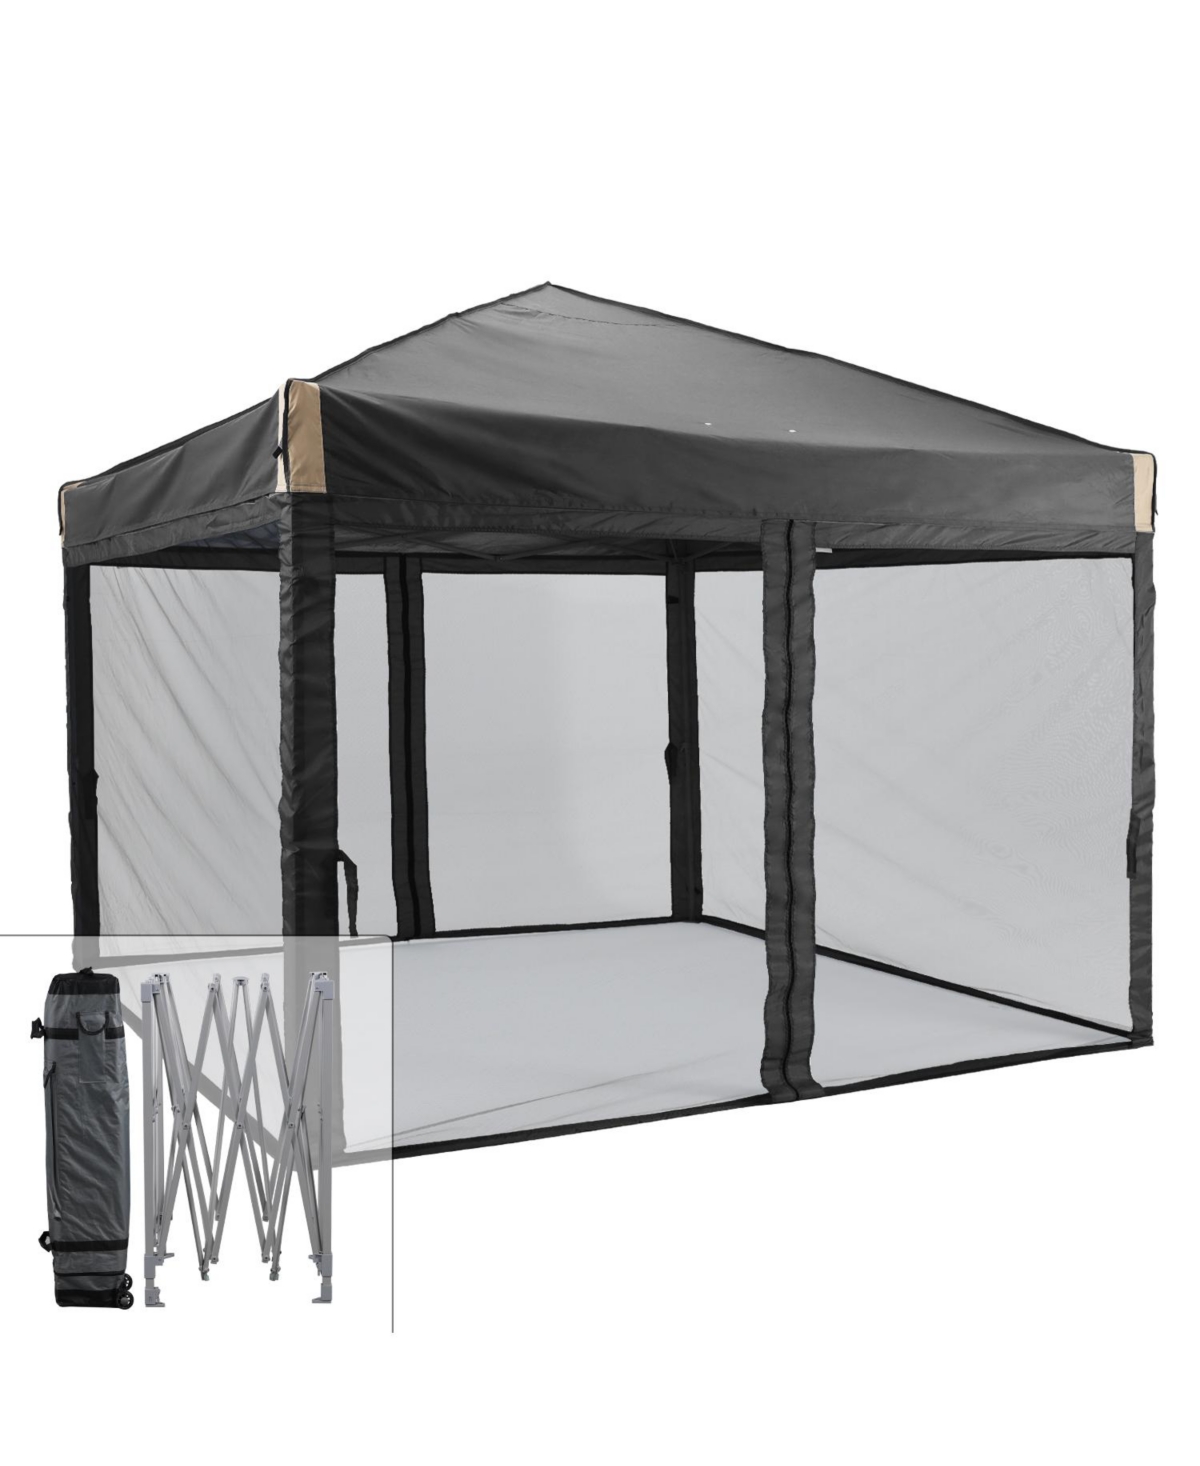 Pop Up Canopy Tent with Removable Mesh Sidewalls, Portable Instant Shade Canopy with Roller Bag - Grey